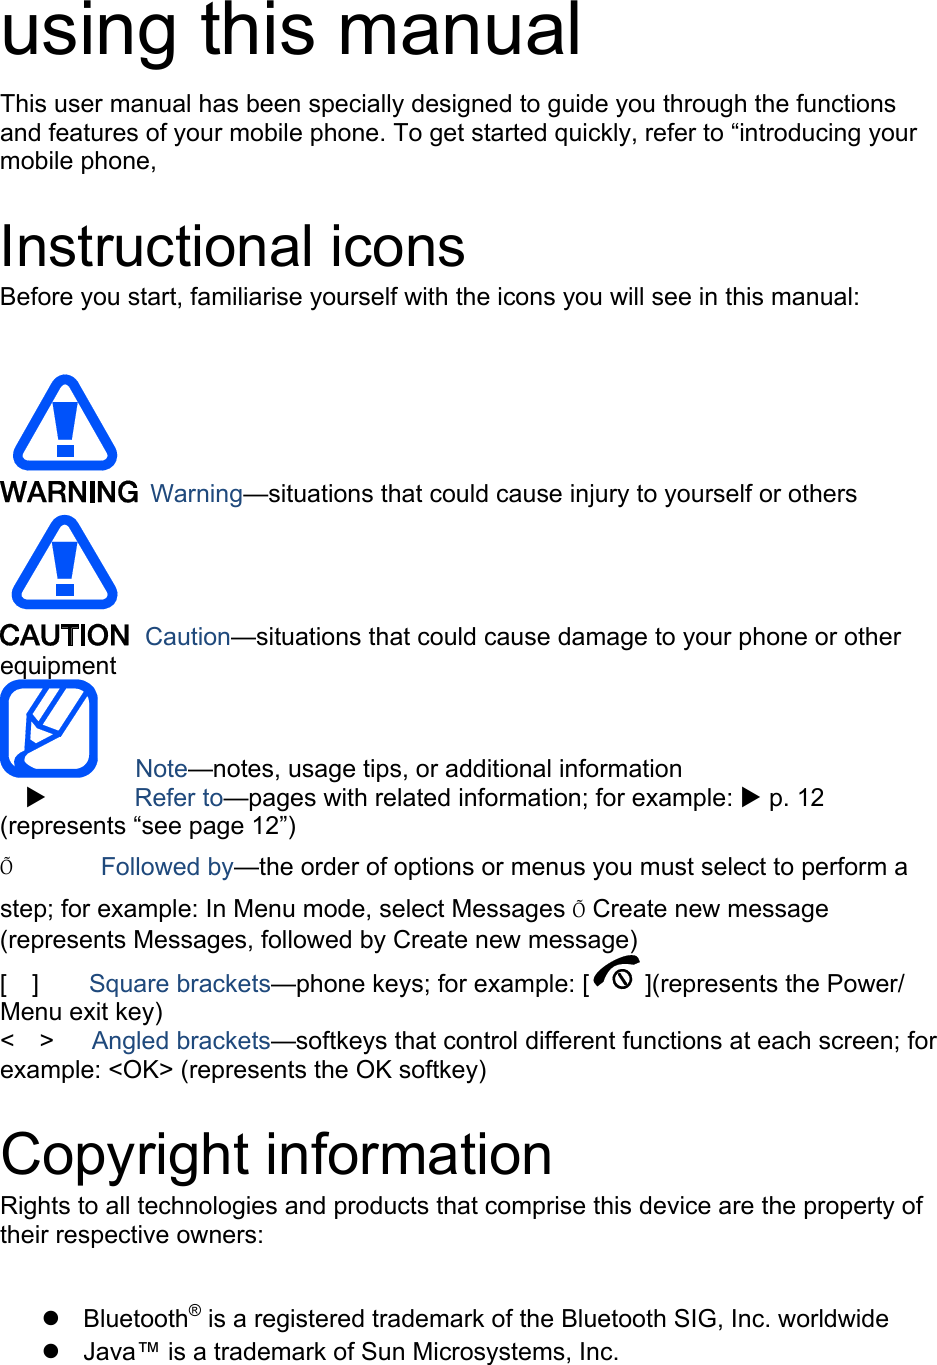  using this manual This user manual has been specially designed to guide you through the functions and features of your mobile phone. To get started quickly, refer to “introducing your mobile phone,  Instructional icons Before you start, familiarise yourself with the icons you will see in this manual:     Warning—situations that could cause injury to yourself or others  Caution—situations that could cause damage to your phone or other equipment    Note—notes, usage tips, or additional information          Refer to—pages with related information; for example:  p. 12 (represents “see page 12”) Õ       Followed by—the order of options or menus you must select to perform a step; for example: In Menu mode, select Messages Õ Create new message (represents Messages, followed by Create new message) [  ]    Square brackets—phone keys; for example: [ ](represents the Power/ Menu exit key) &lt;  &gt;   Angled brackets—softkeys that control different functions at each screen; for example: &lt;OK&gt; (represents the OK softkey)  Copyright information Rights to all technologies and products that comprise this device are the property of their respective owners:   Bluetooth® is a registered trademark of the Bluetooth SIG, Inc. worldwide   Java™ is a trademark of Sun Microsystems, Inc. 